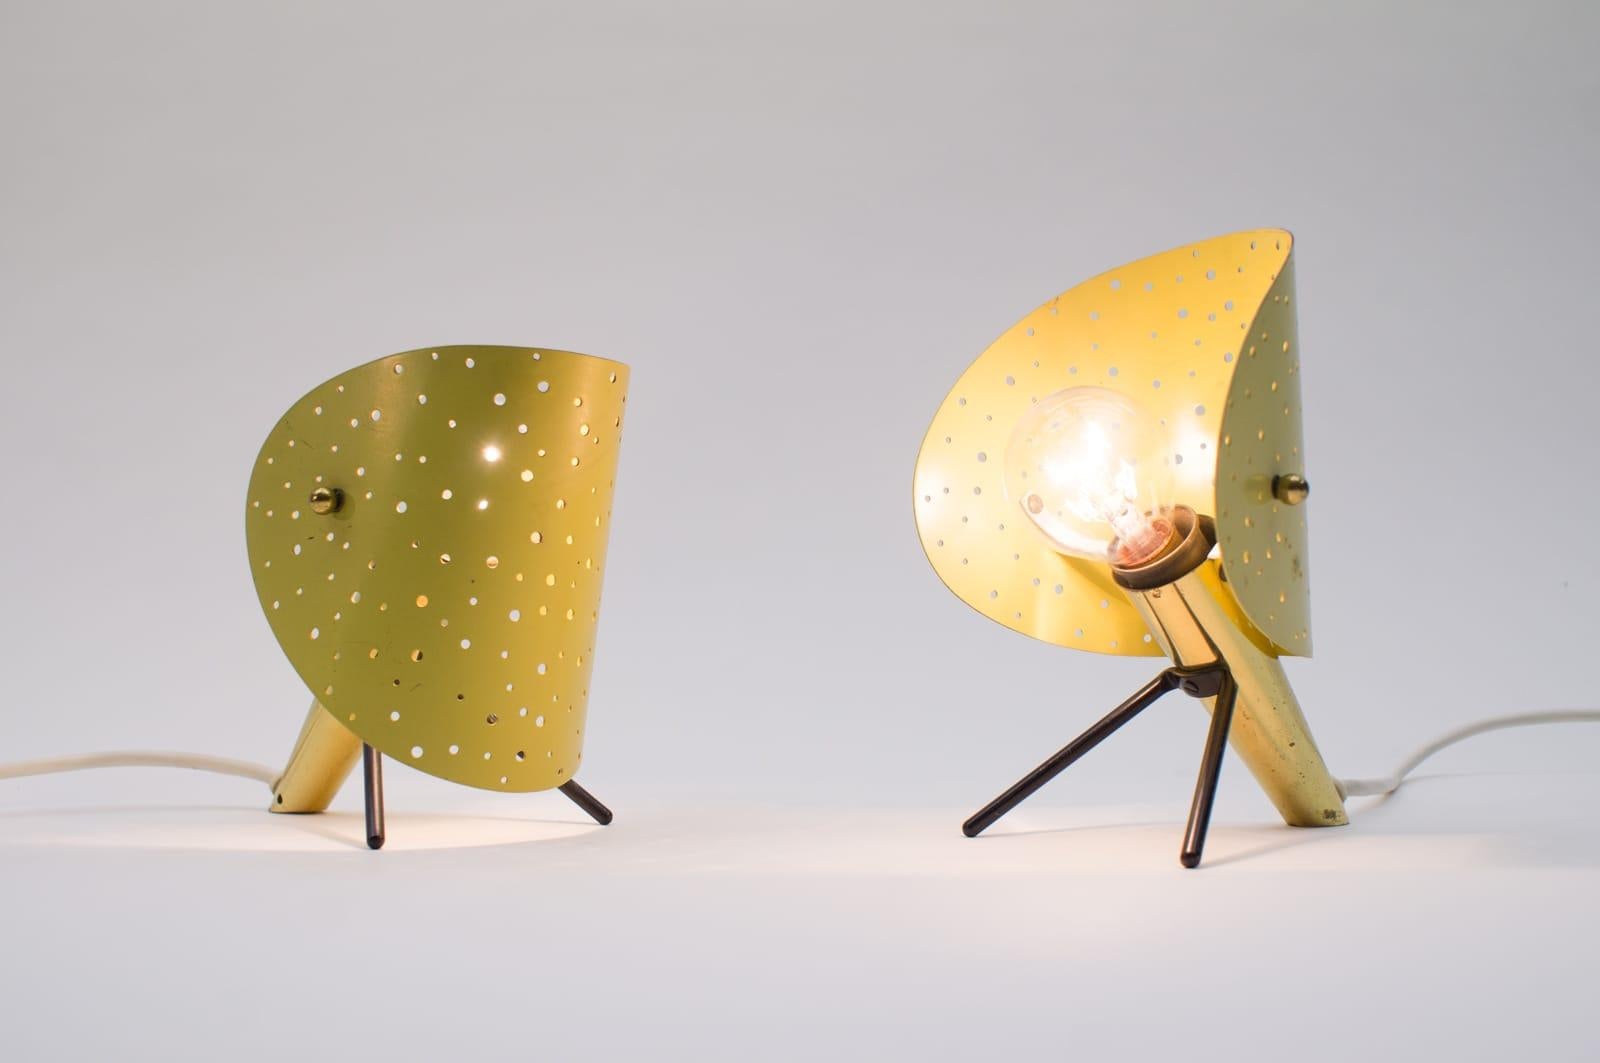 Metal Table Lamps by Ernst Igl for Hillebrand, Set of 2, 1950s, Germany For Sale